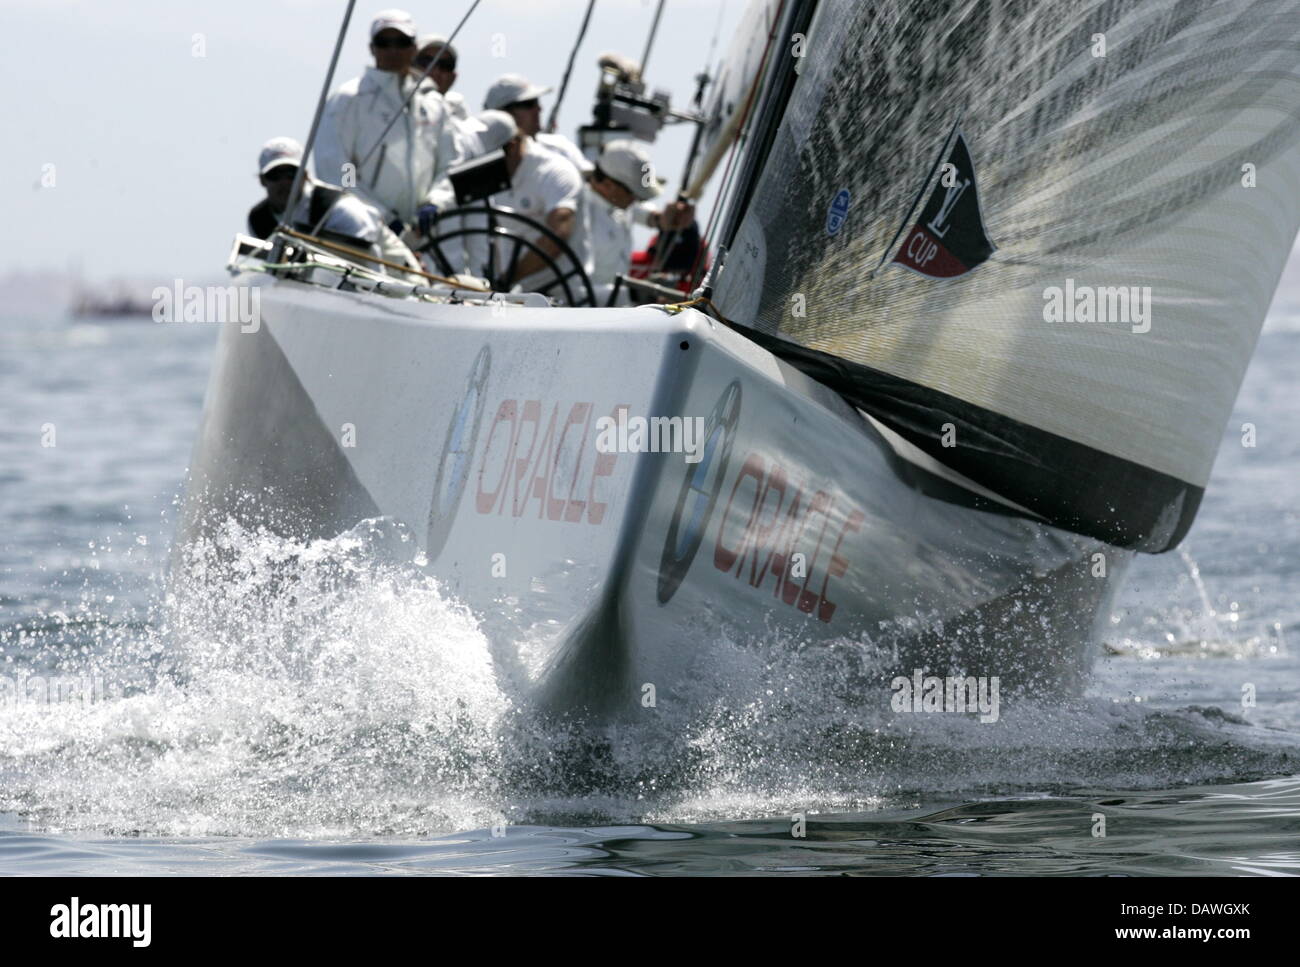 The yacht of the US-American BMW Oracle Team tests the ground as the wind  picks up during the Louis Vuitton Cup regatta forming part of the America's  Cup,Valencia, Spain, 23 April 2007.